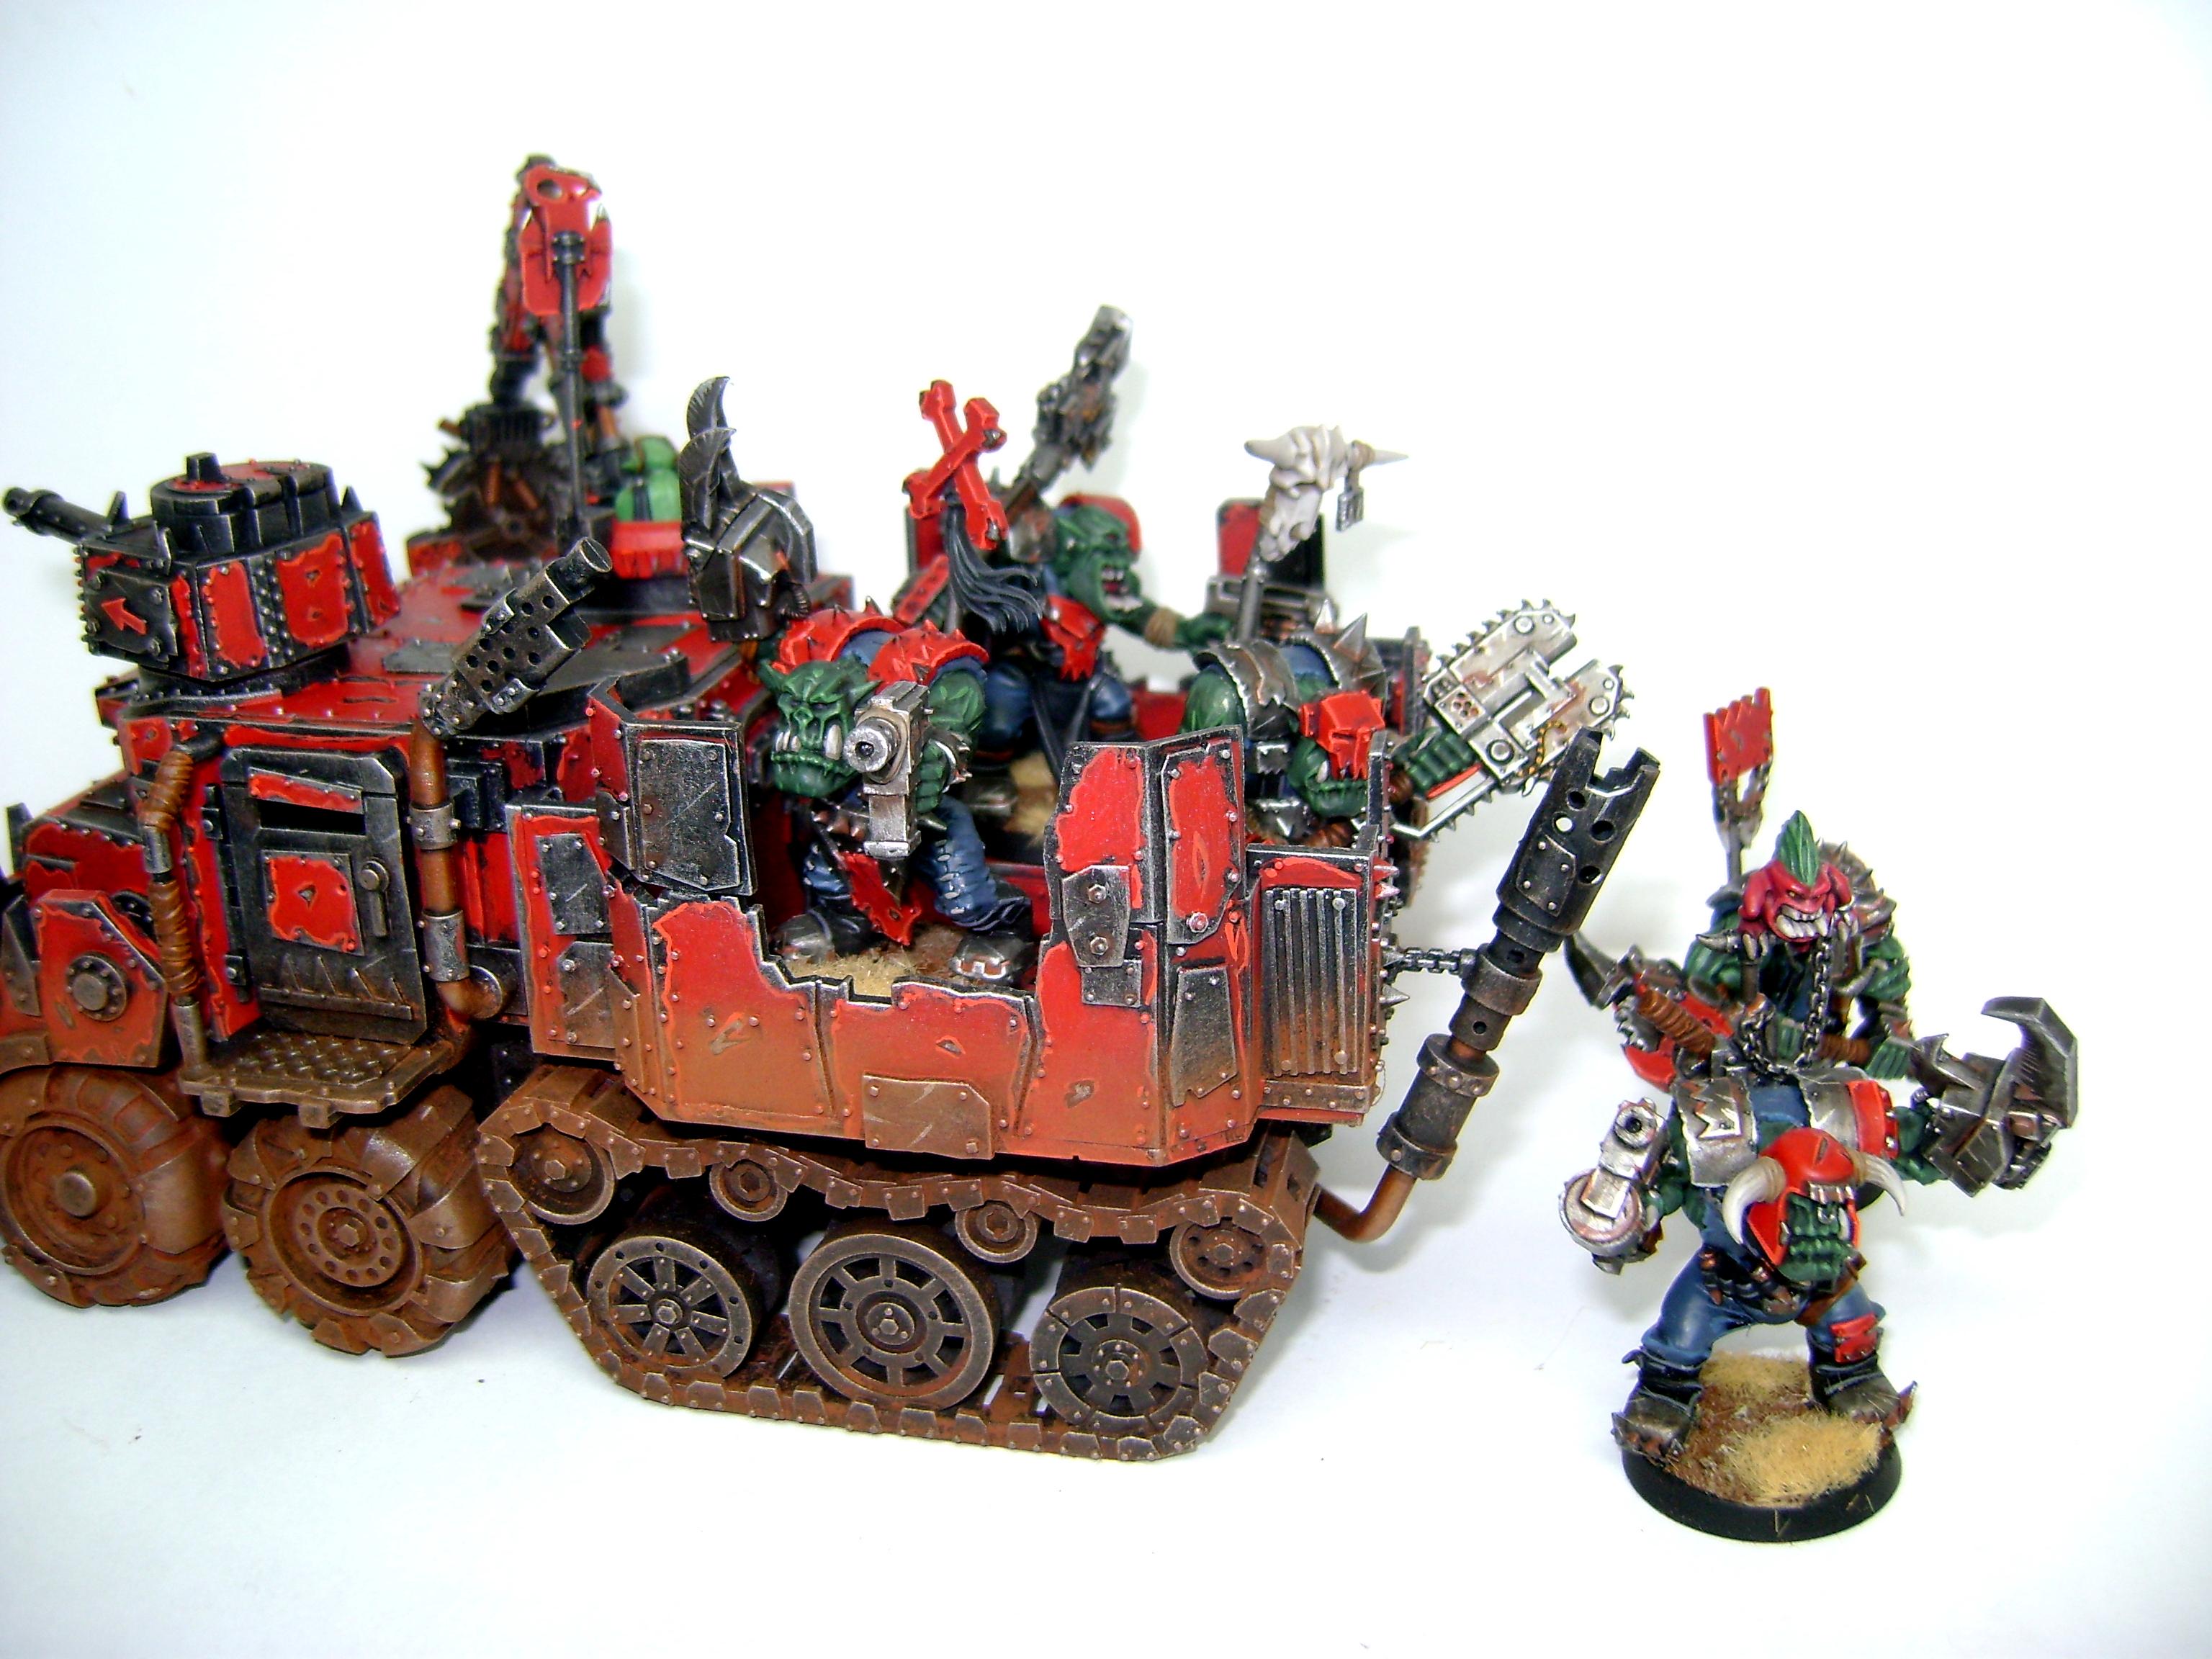 Orks, Dark Reapaz nobz and truck